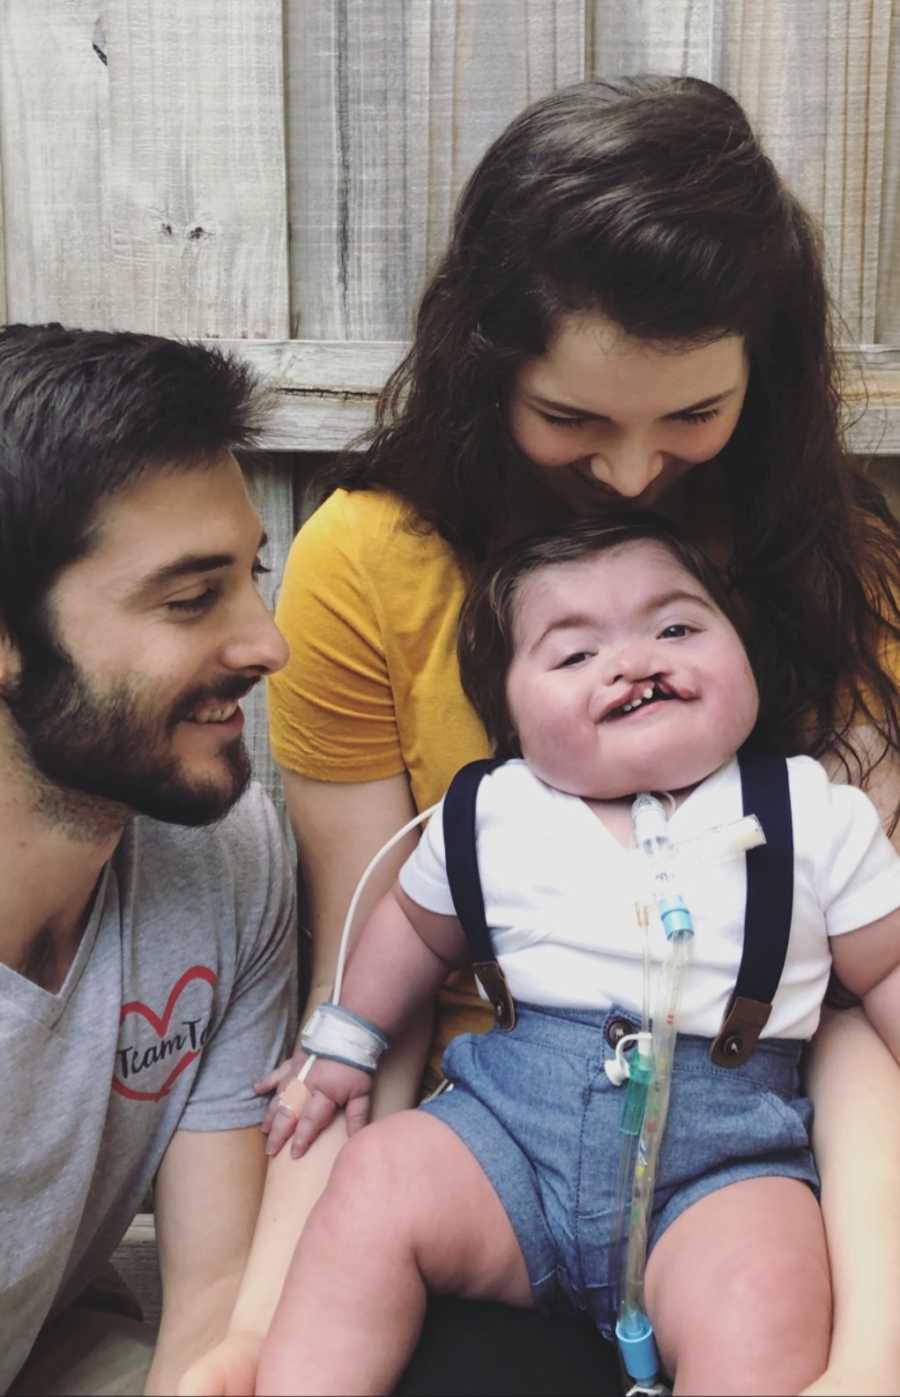 Mother looks down at baby boy with cleft palate as husband looks over at son smiling